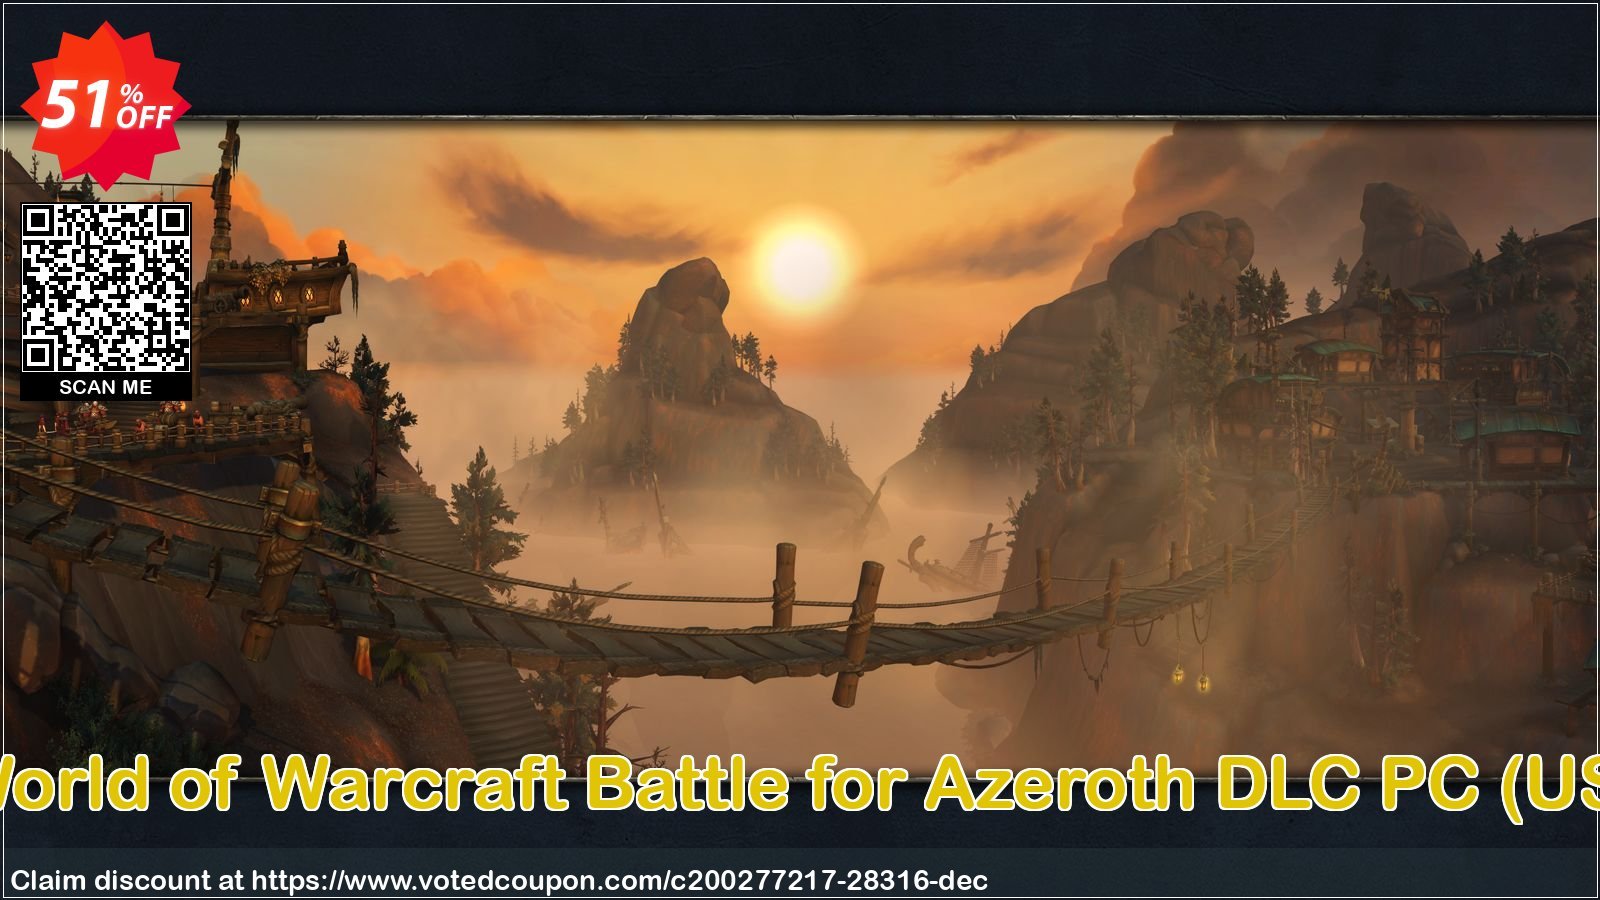 World of Warcraft Battle for Azeroth DLC PC, US  Coupon Code Apr 2024, 51% OFF - VotedCoupon